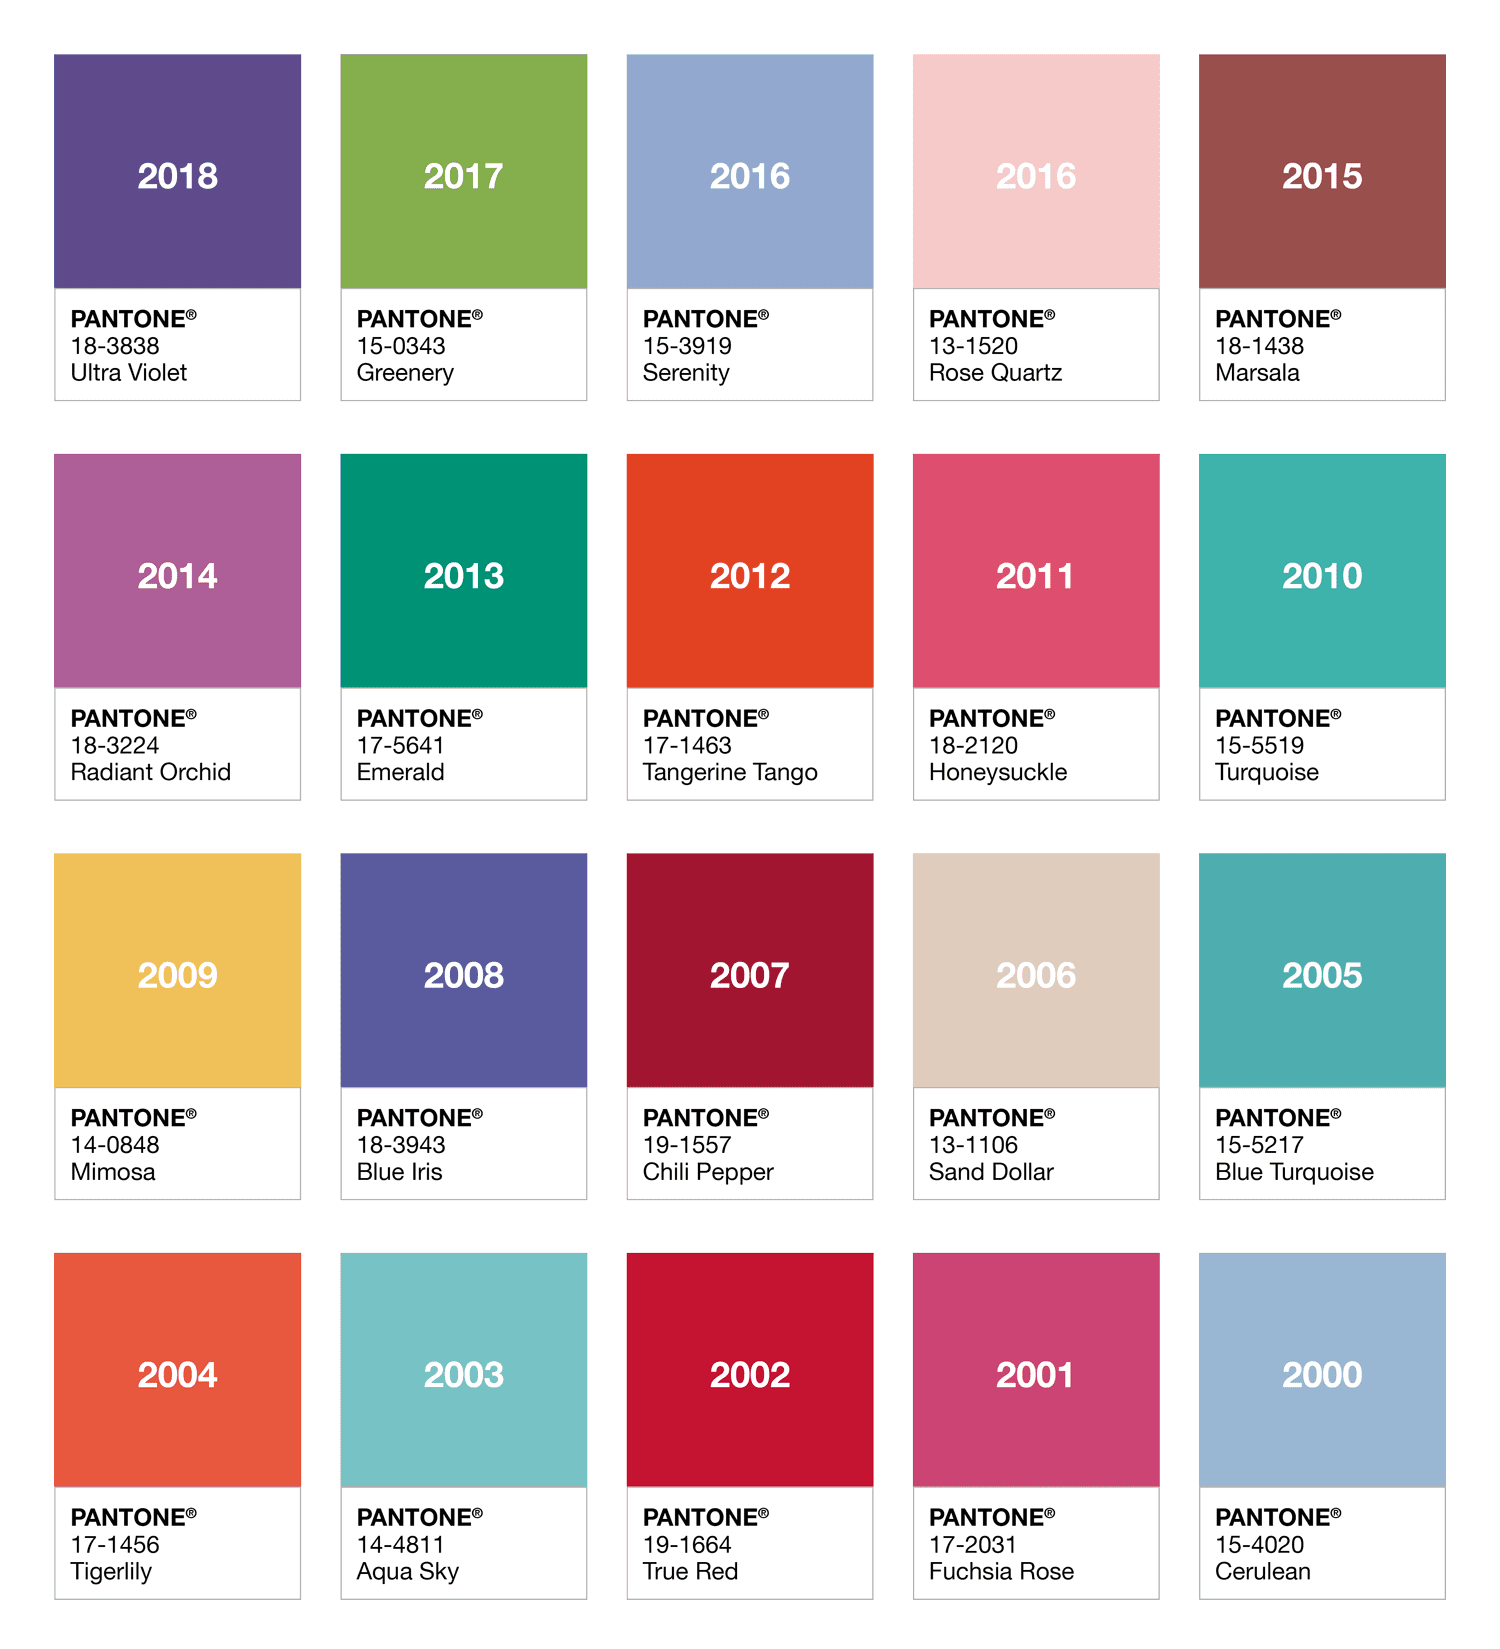 Pantone Colour of the Year overview